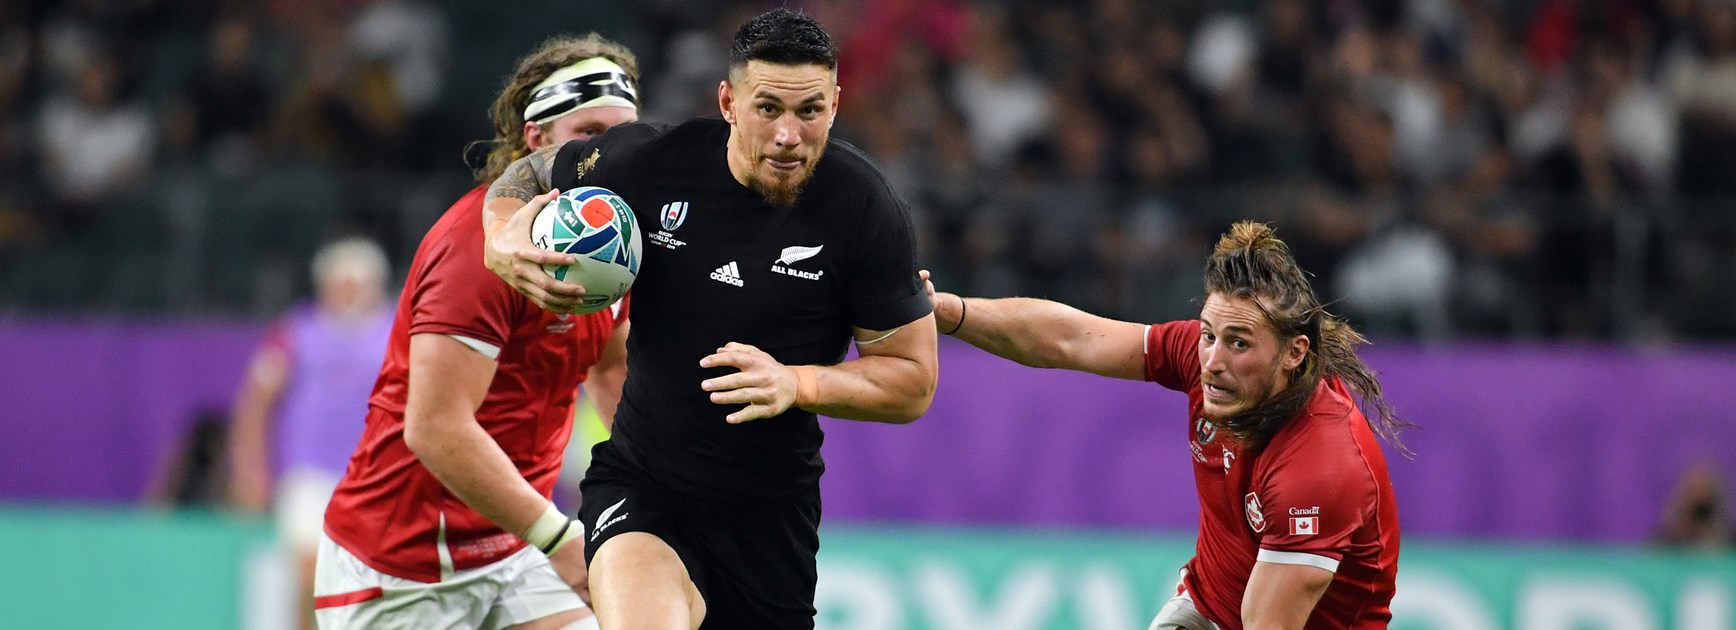 Sonny Bill Williams takes on Canada at the World Cup.